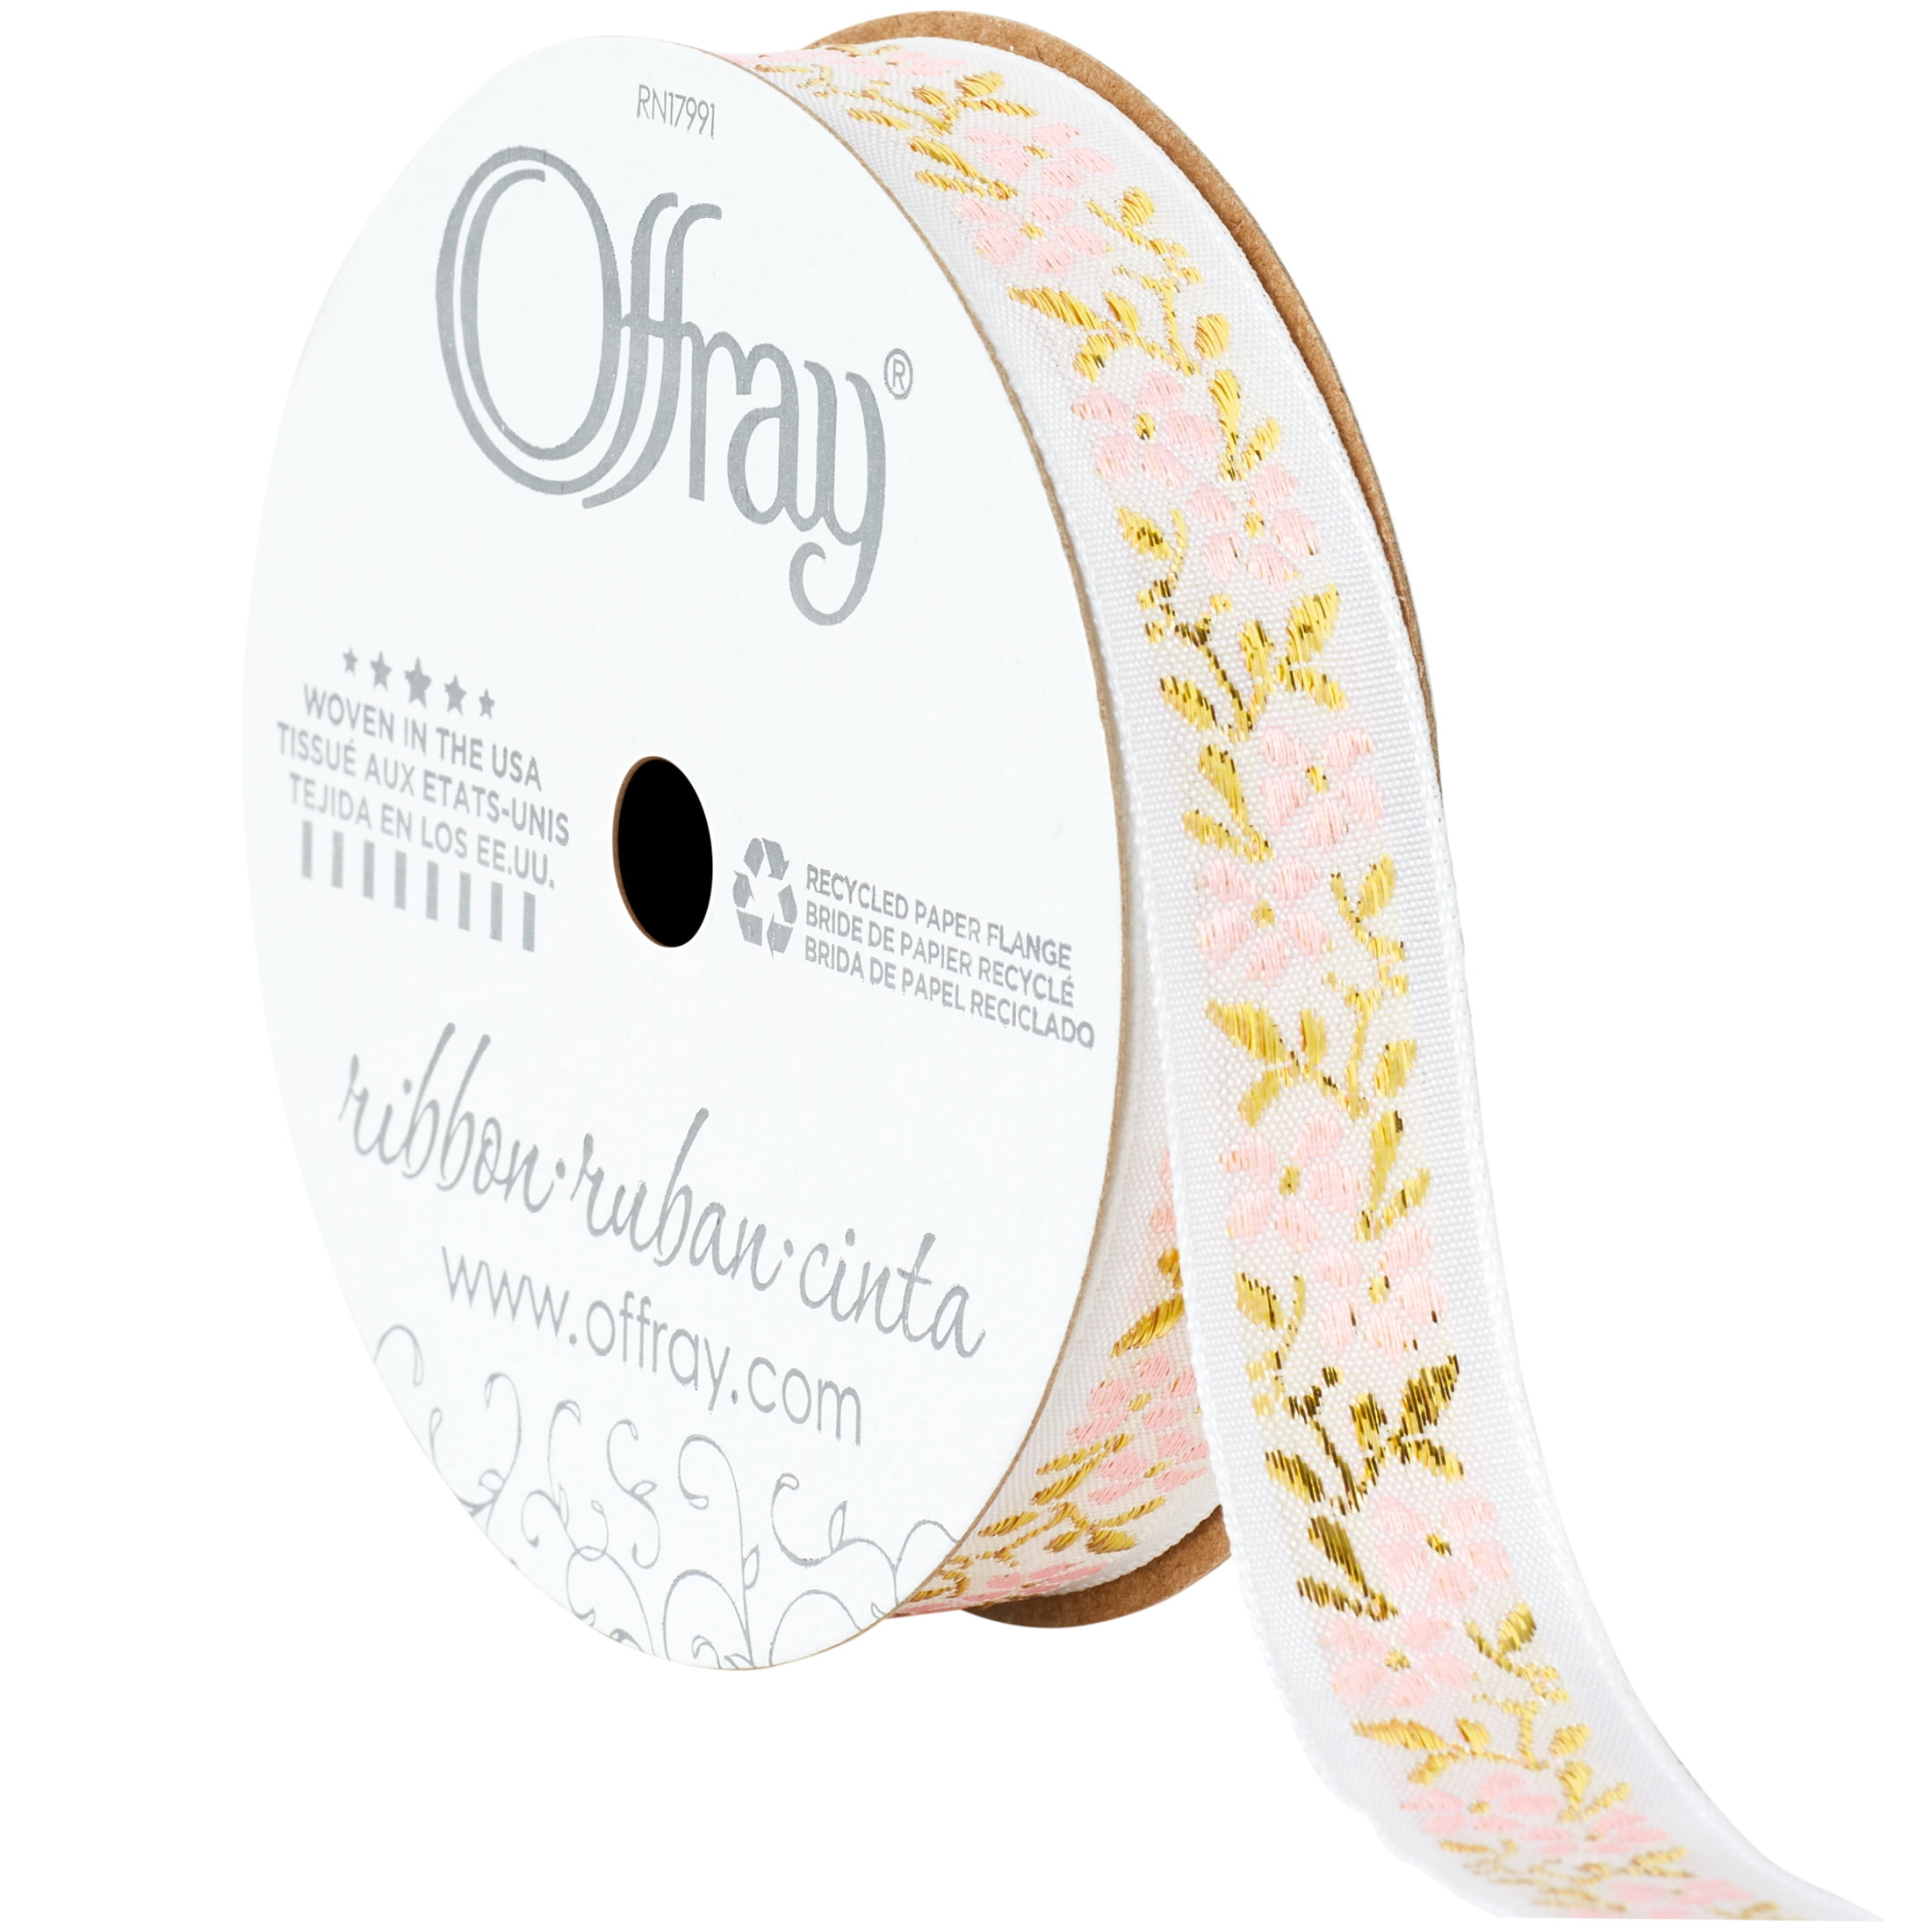 Offray Ribbon, White 5/8 inch Floral Jacquard Ribbon for Wedding, Crafts, Gifting, 9 feet, 1 Each